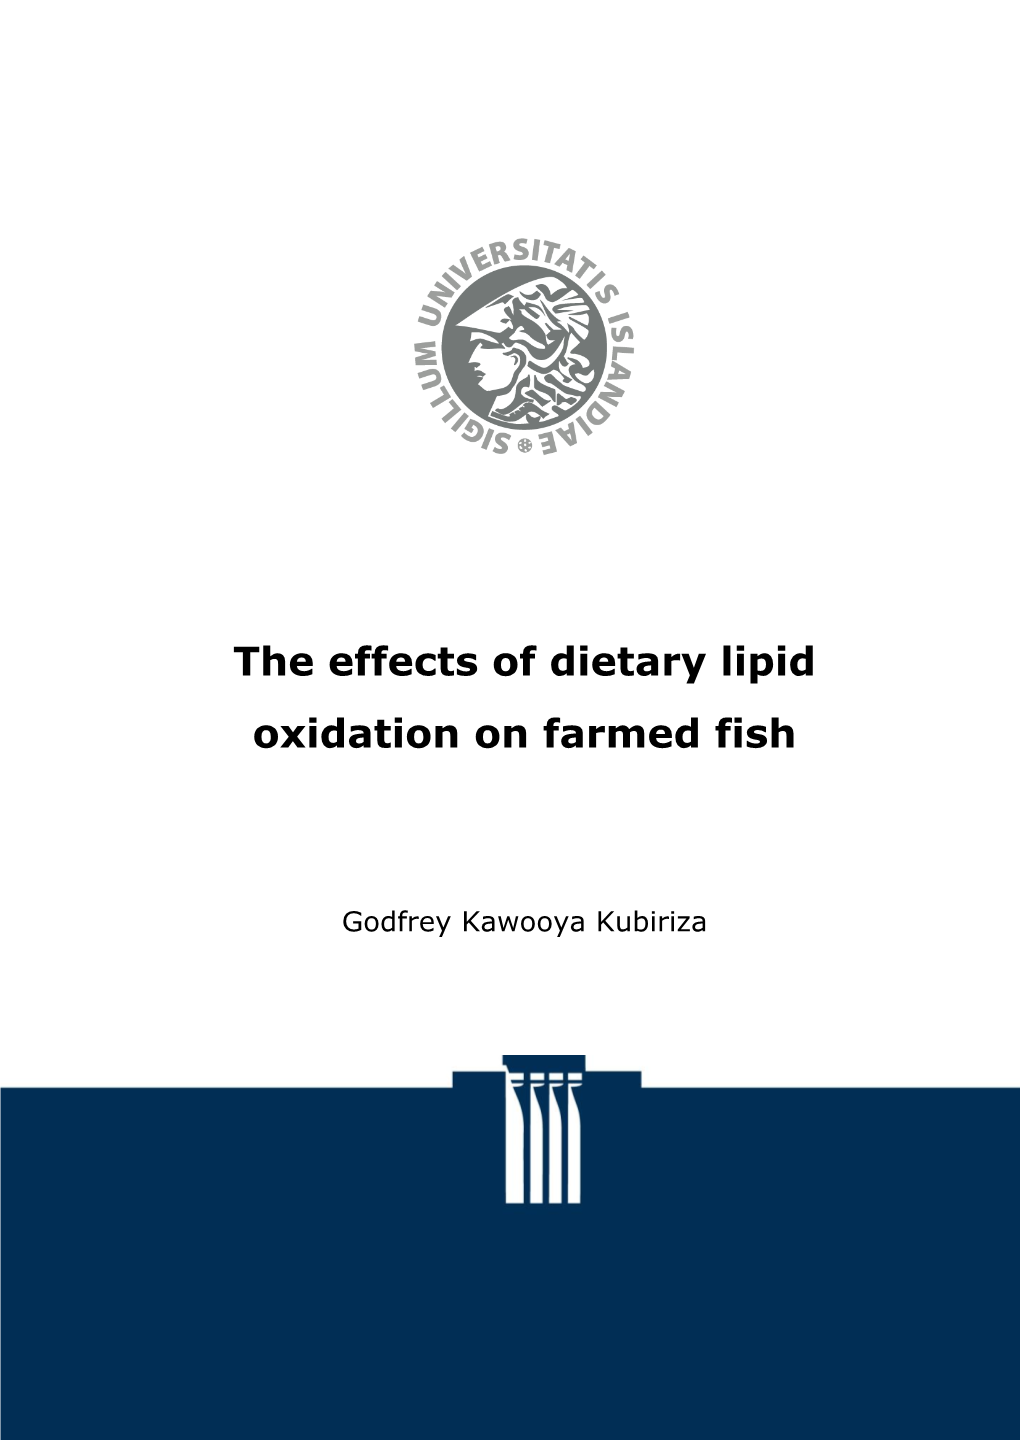 The Effects of Dietary Lipid Oxidation on Farmed Fish